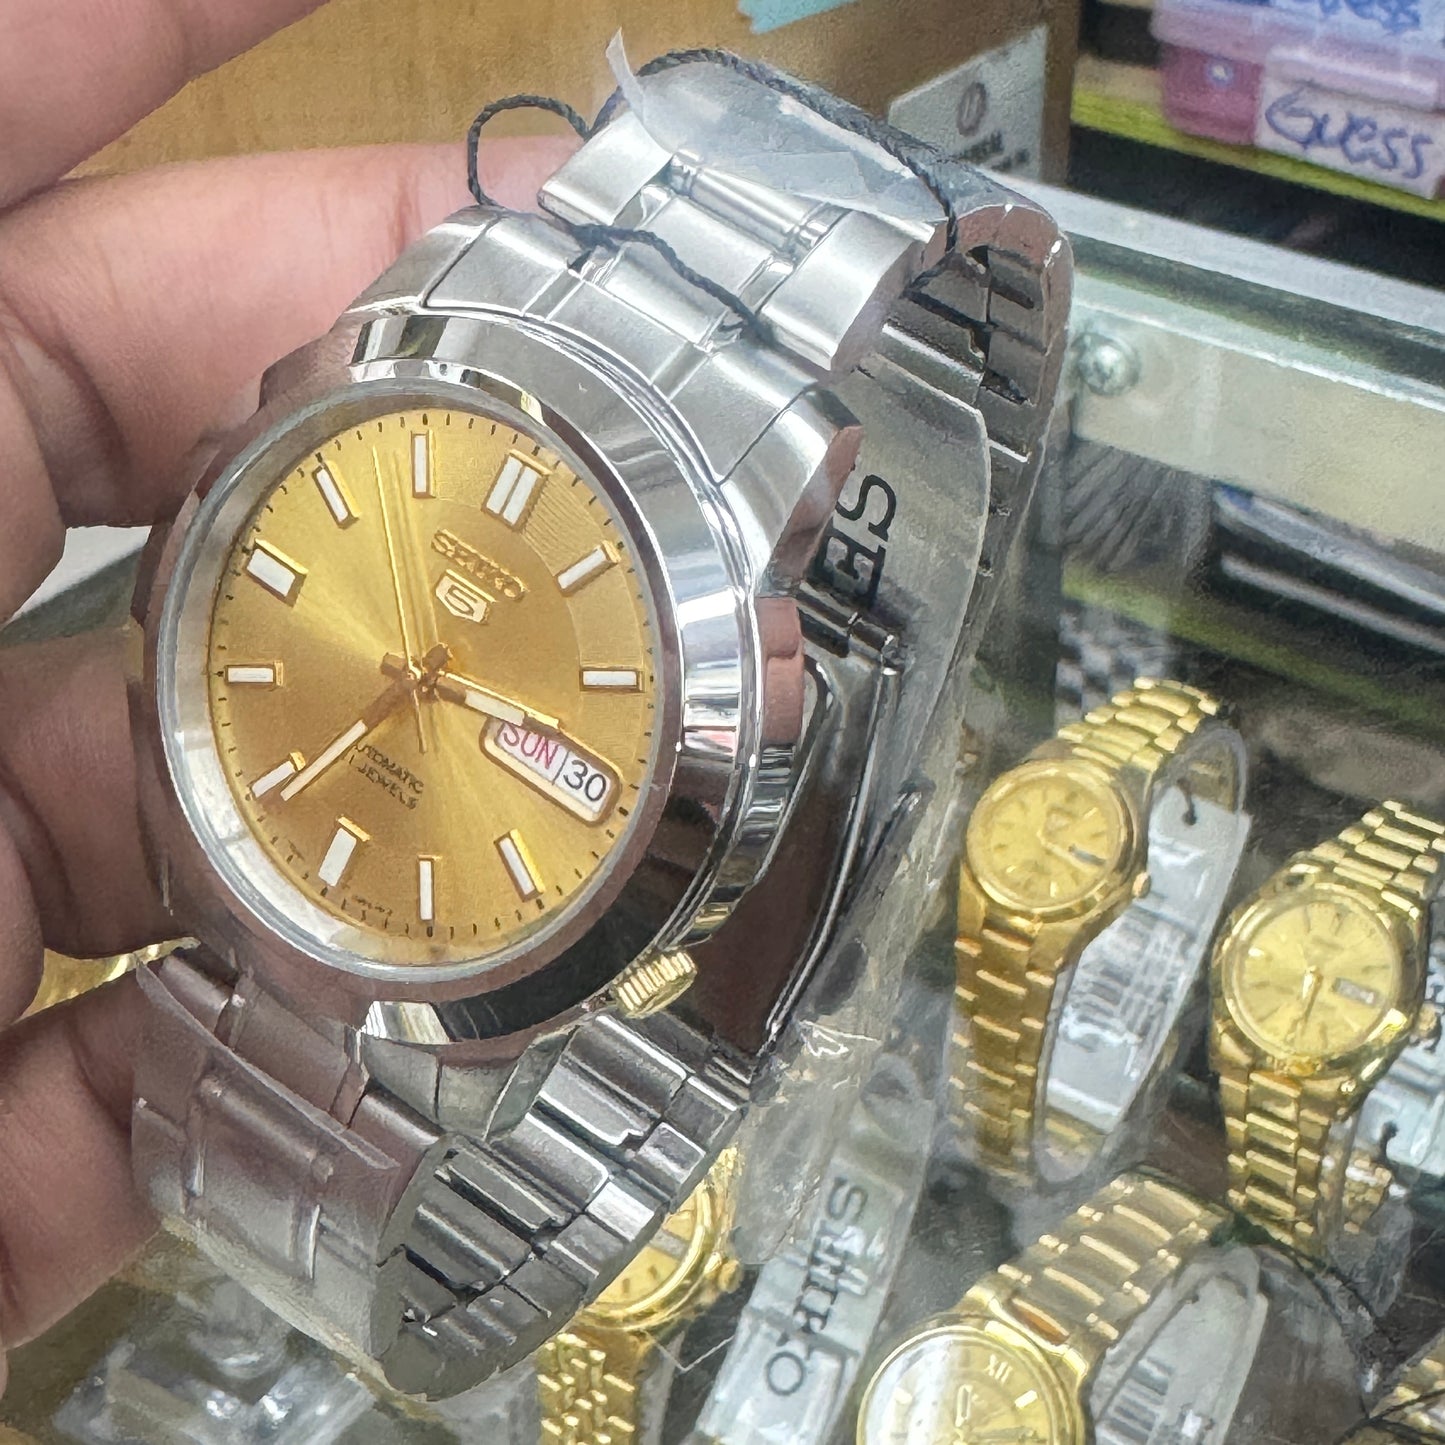 Seiko Automatic Movement for Men Watch  Goldtone / Yellow and Gray Color  See through back crystal glass   Size : 40mm Diameter Men Wrist Size  Stainless Steel Material   Brand New Item with Tag  Box is color black regular black box  self-winding,” automa